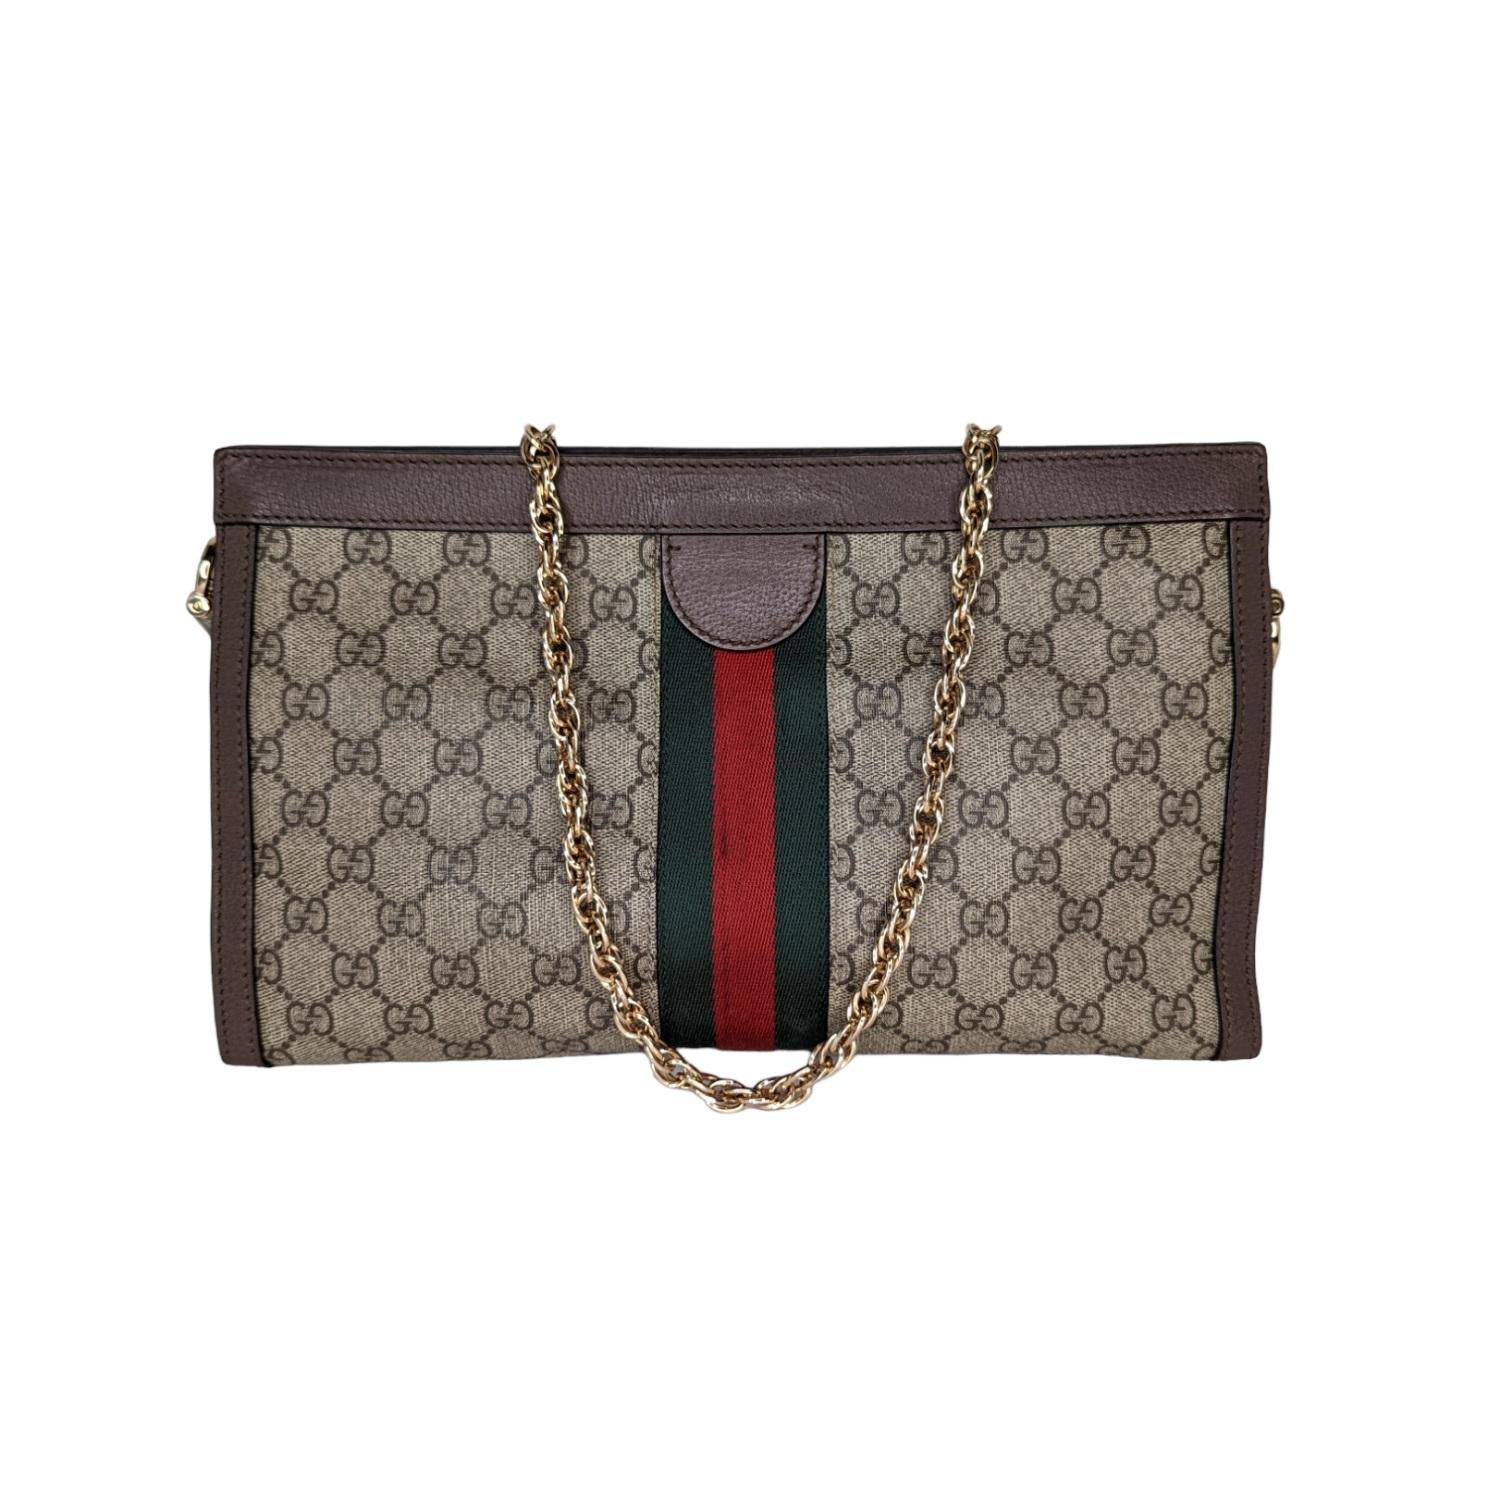 This chic shoulder bag is finely crafted of brown on beige and ebony Gucci GG supreme monogram coated canvas with a web stripe detail. The bag features a polished gold chain strap, GG logo, and hardware. The magnetic top opens to a partitioned blue